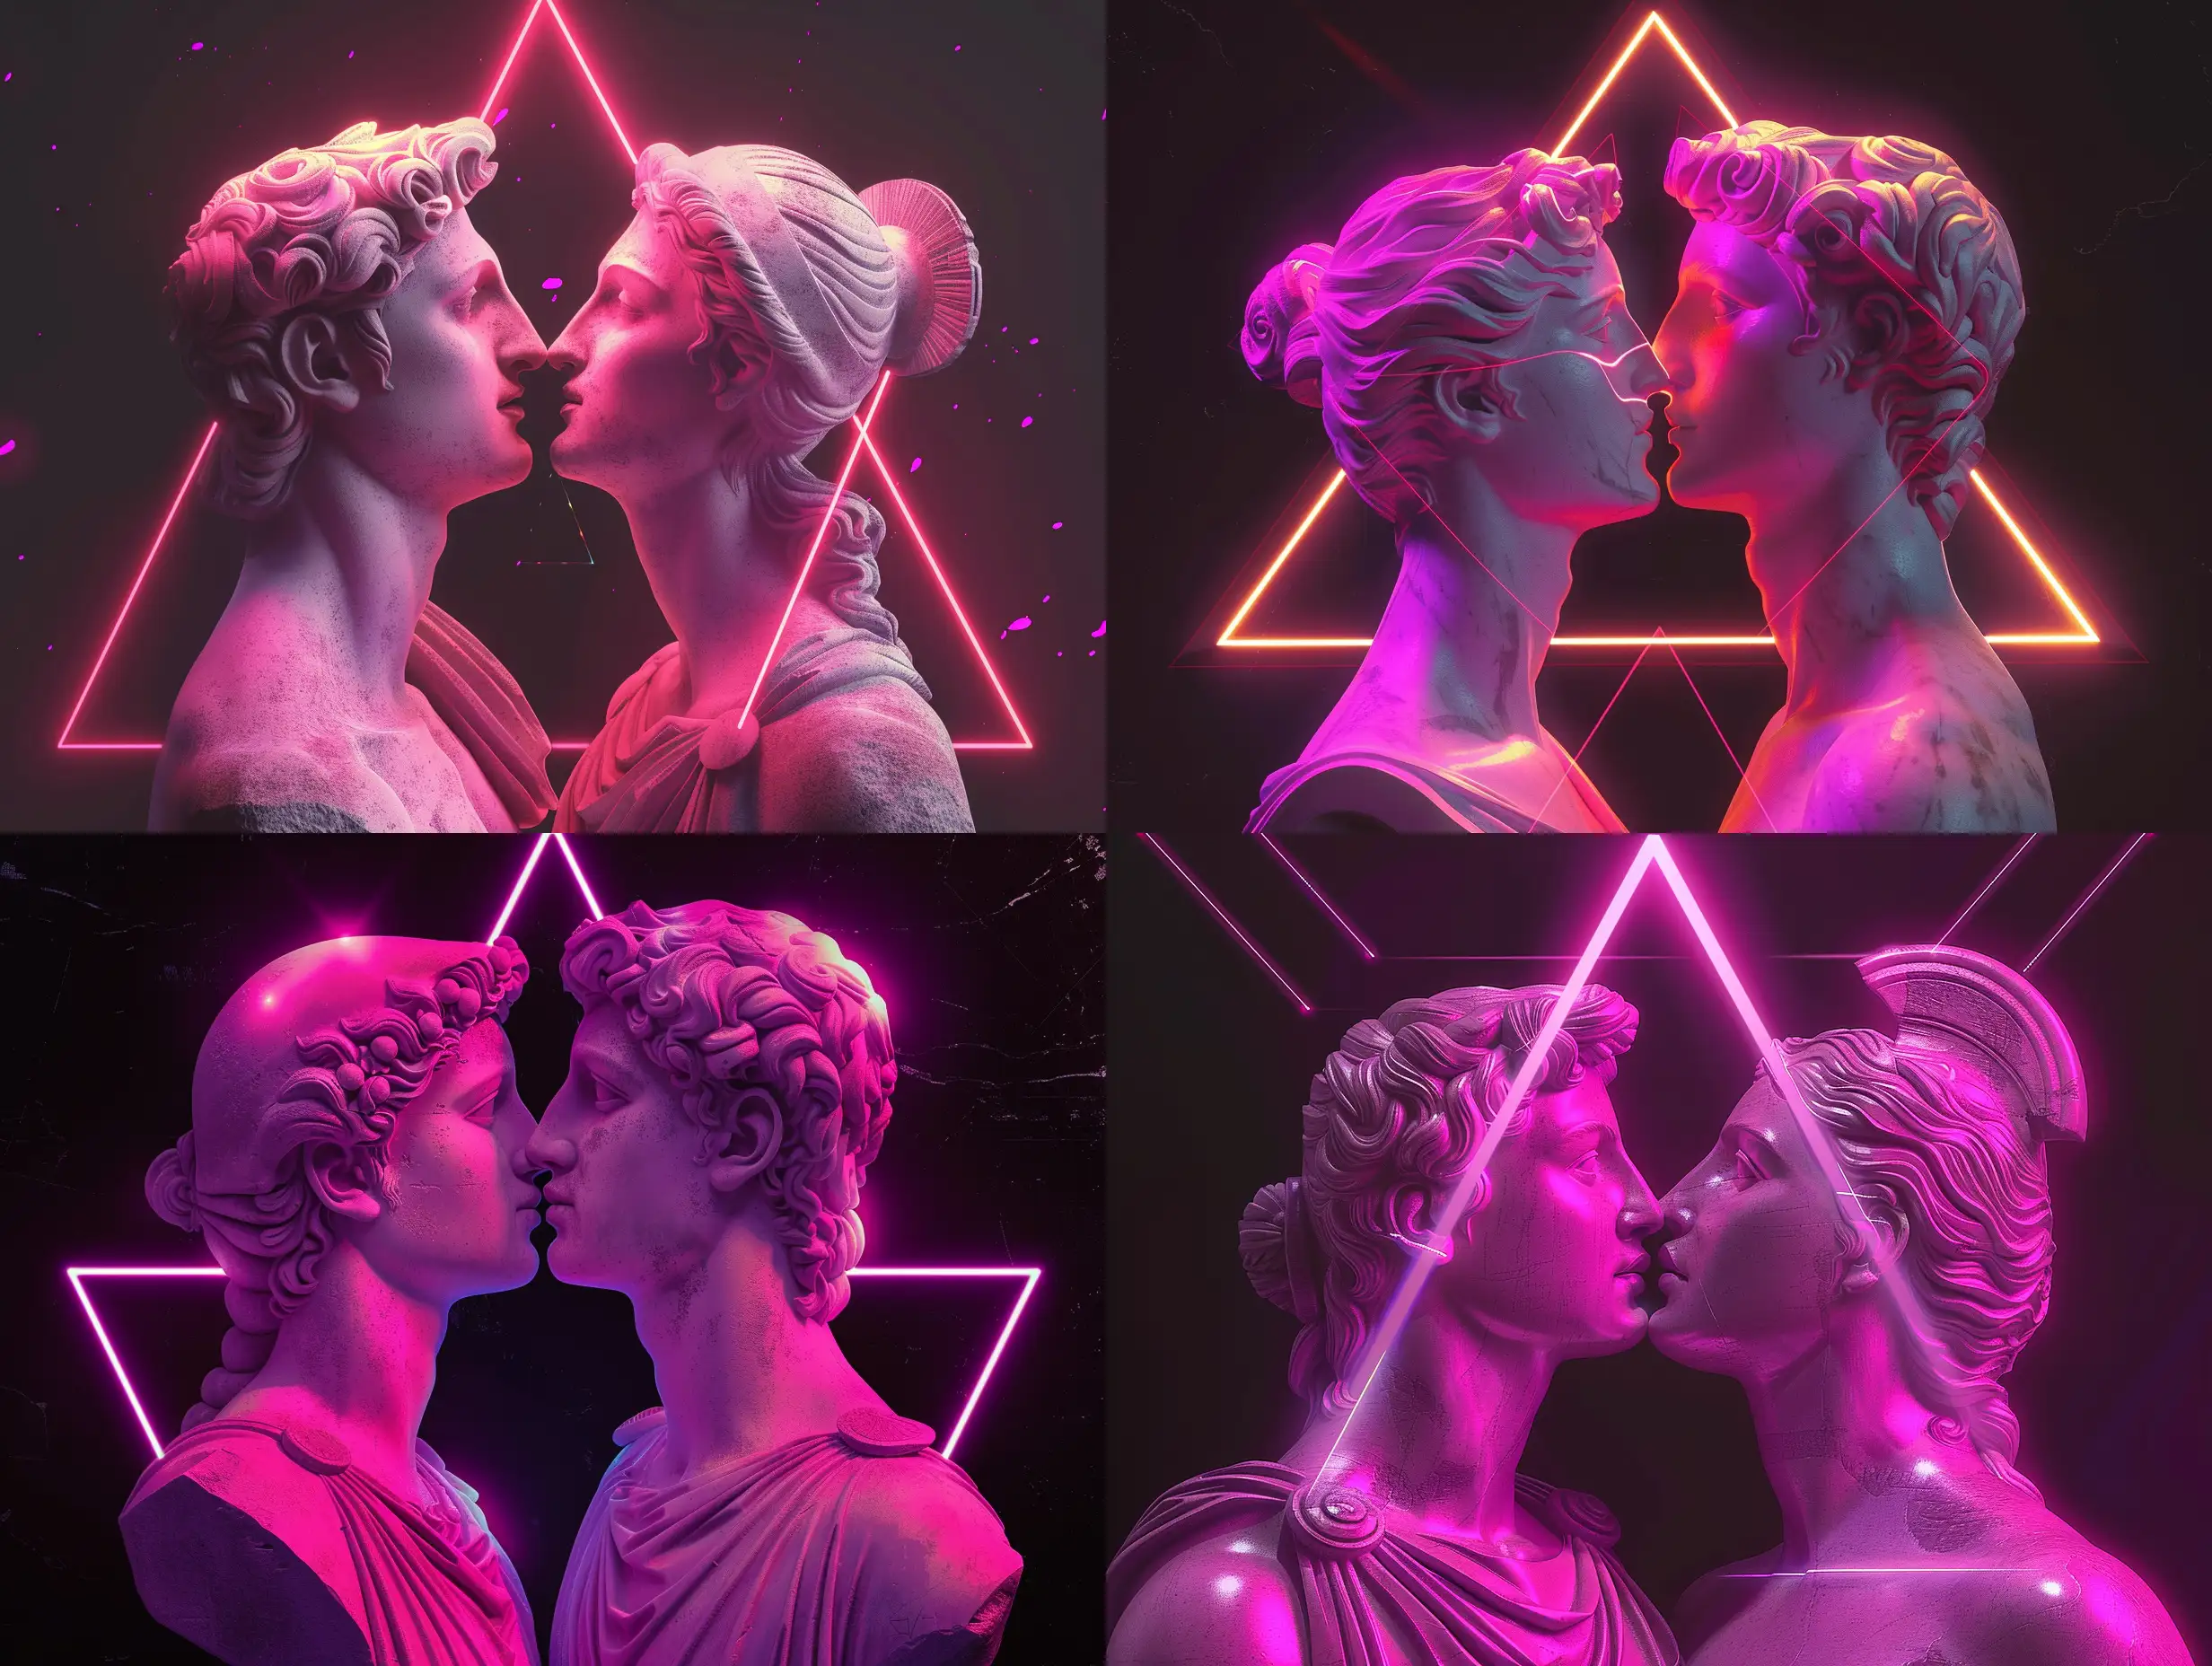  a romantic Greek statues ready to kiss lips of a man and woman with magenta colour, dark background, laser lights behind and front of the heads ,triangle light behind black background,hd, ready for music cover